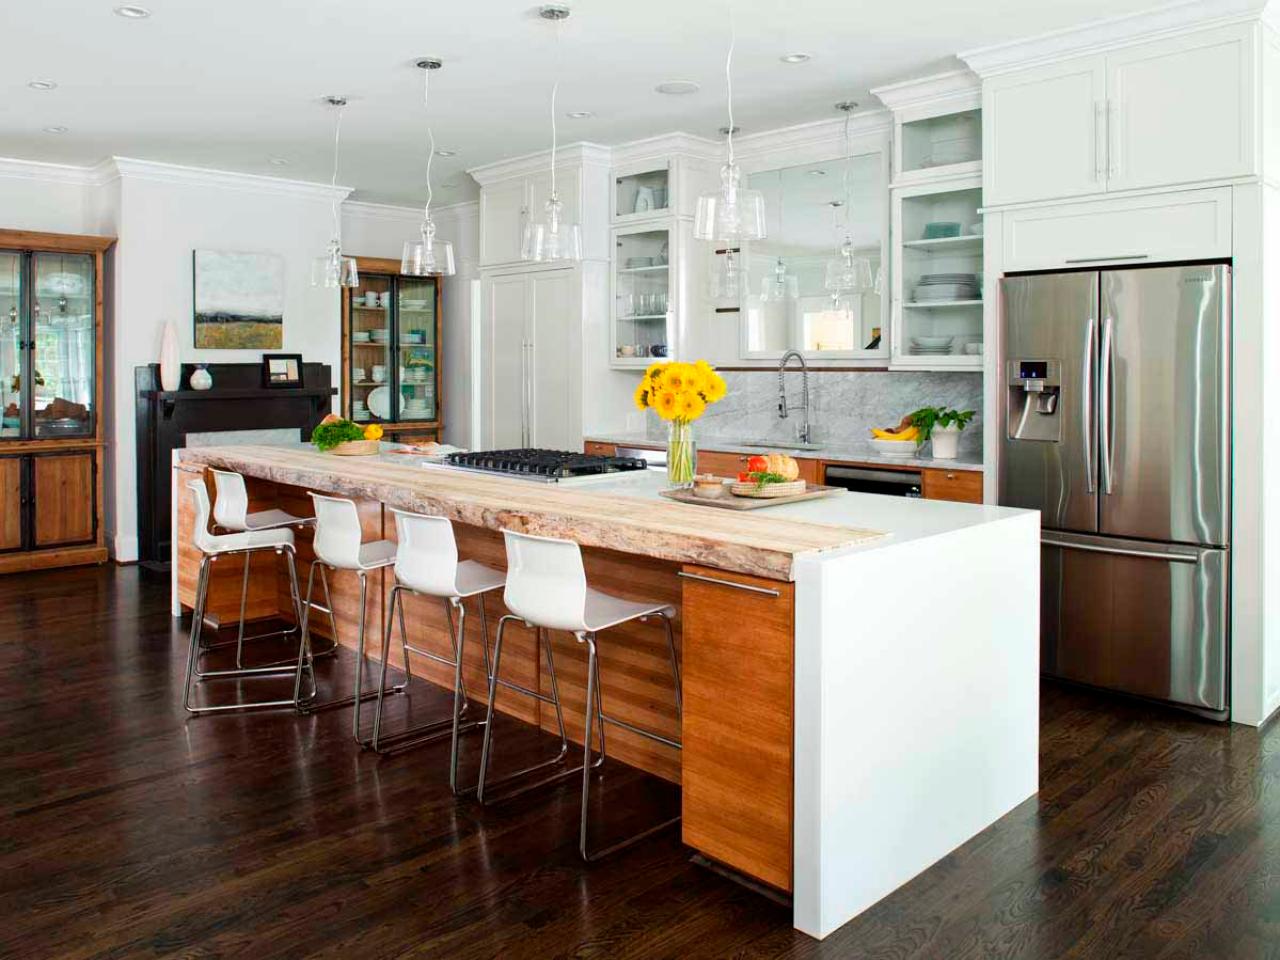 kitchen island seating islands hgtv contemporary designs area accent kitchens wooden multi functional modern cabinets irresistible wood famous built bar